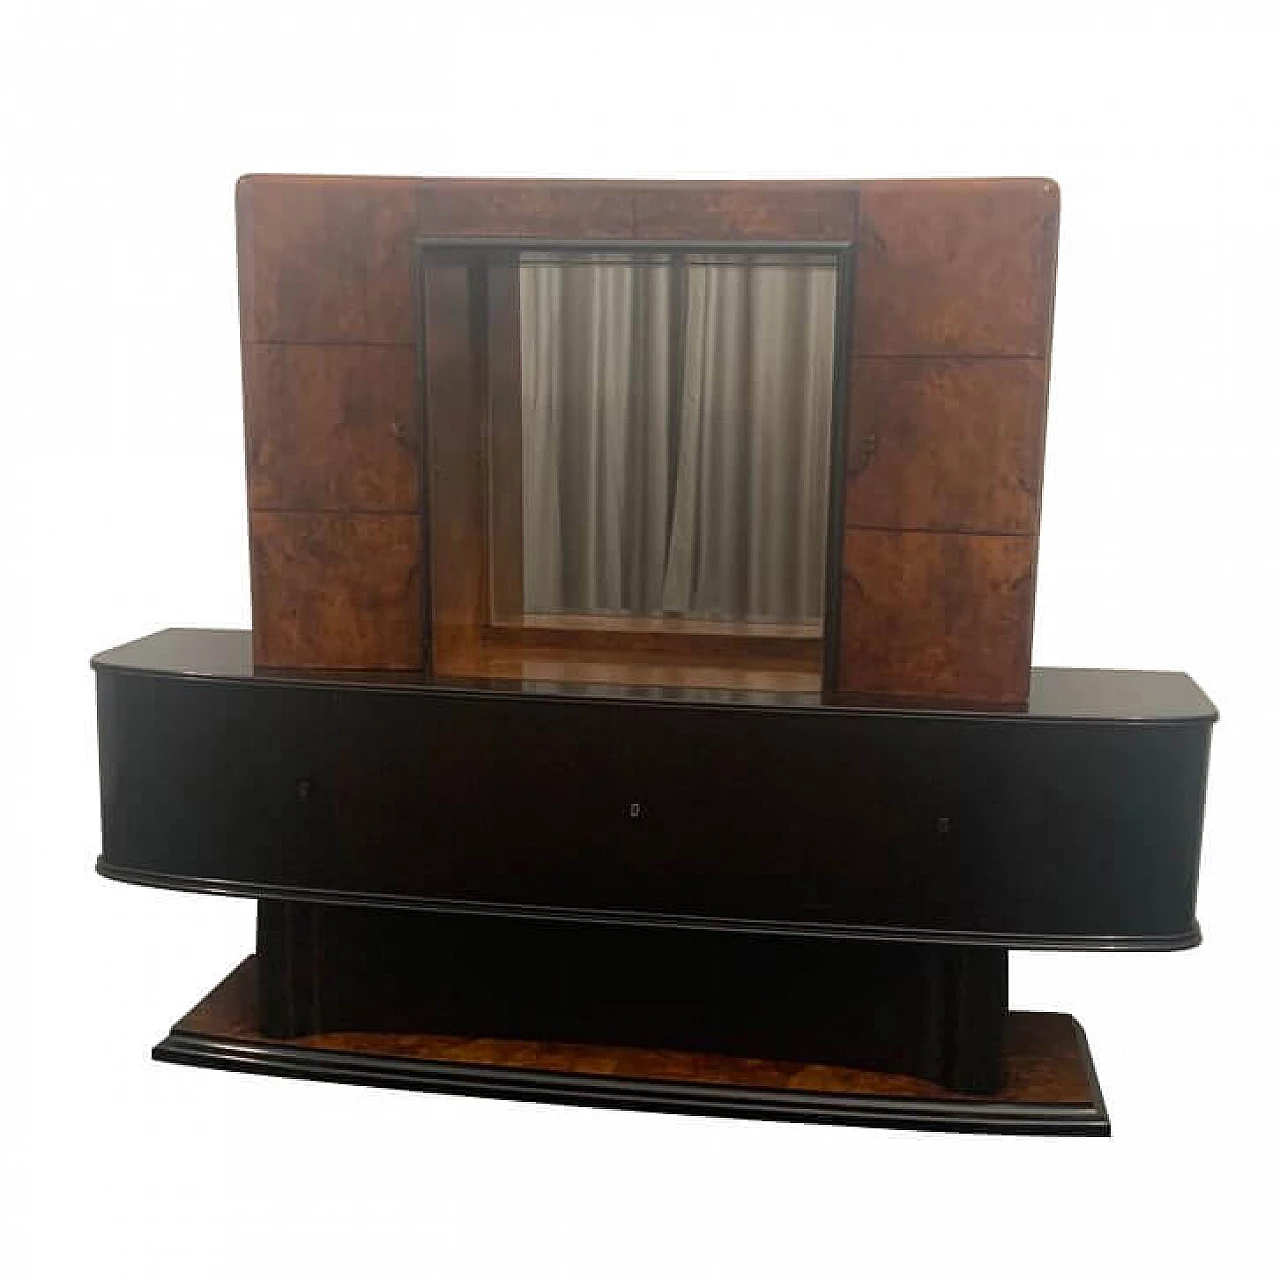 Sideboard in ebony and briarwood, 1930s 1212240